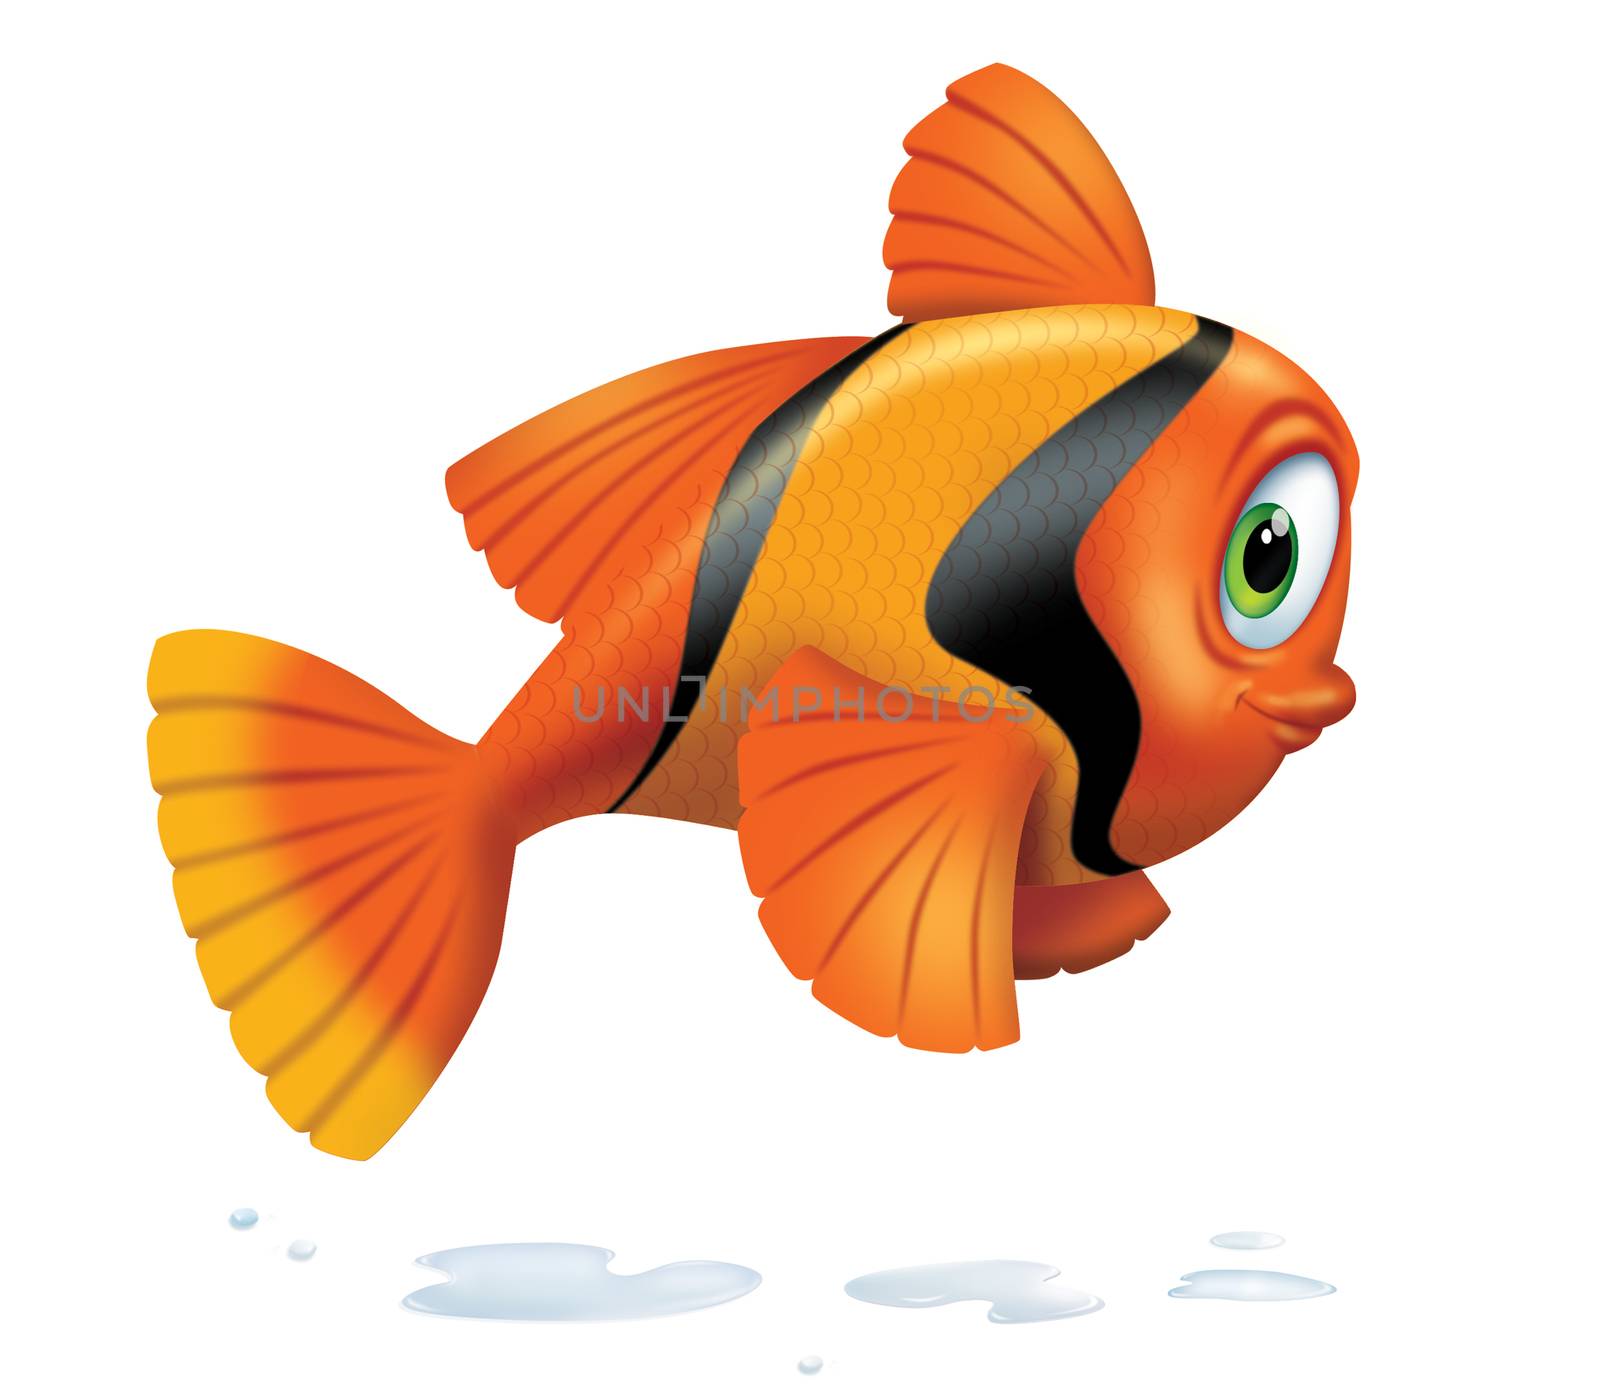 Cute striped goldfish jumping and smiling with water drops on white background.